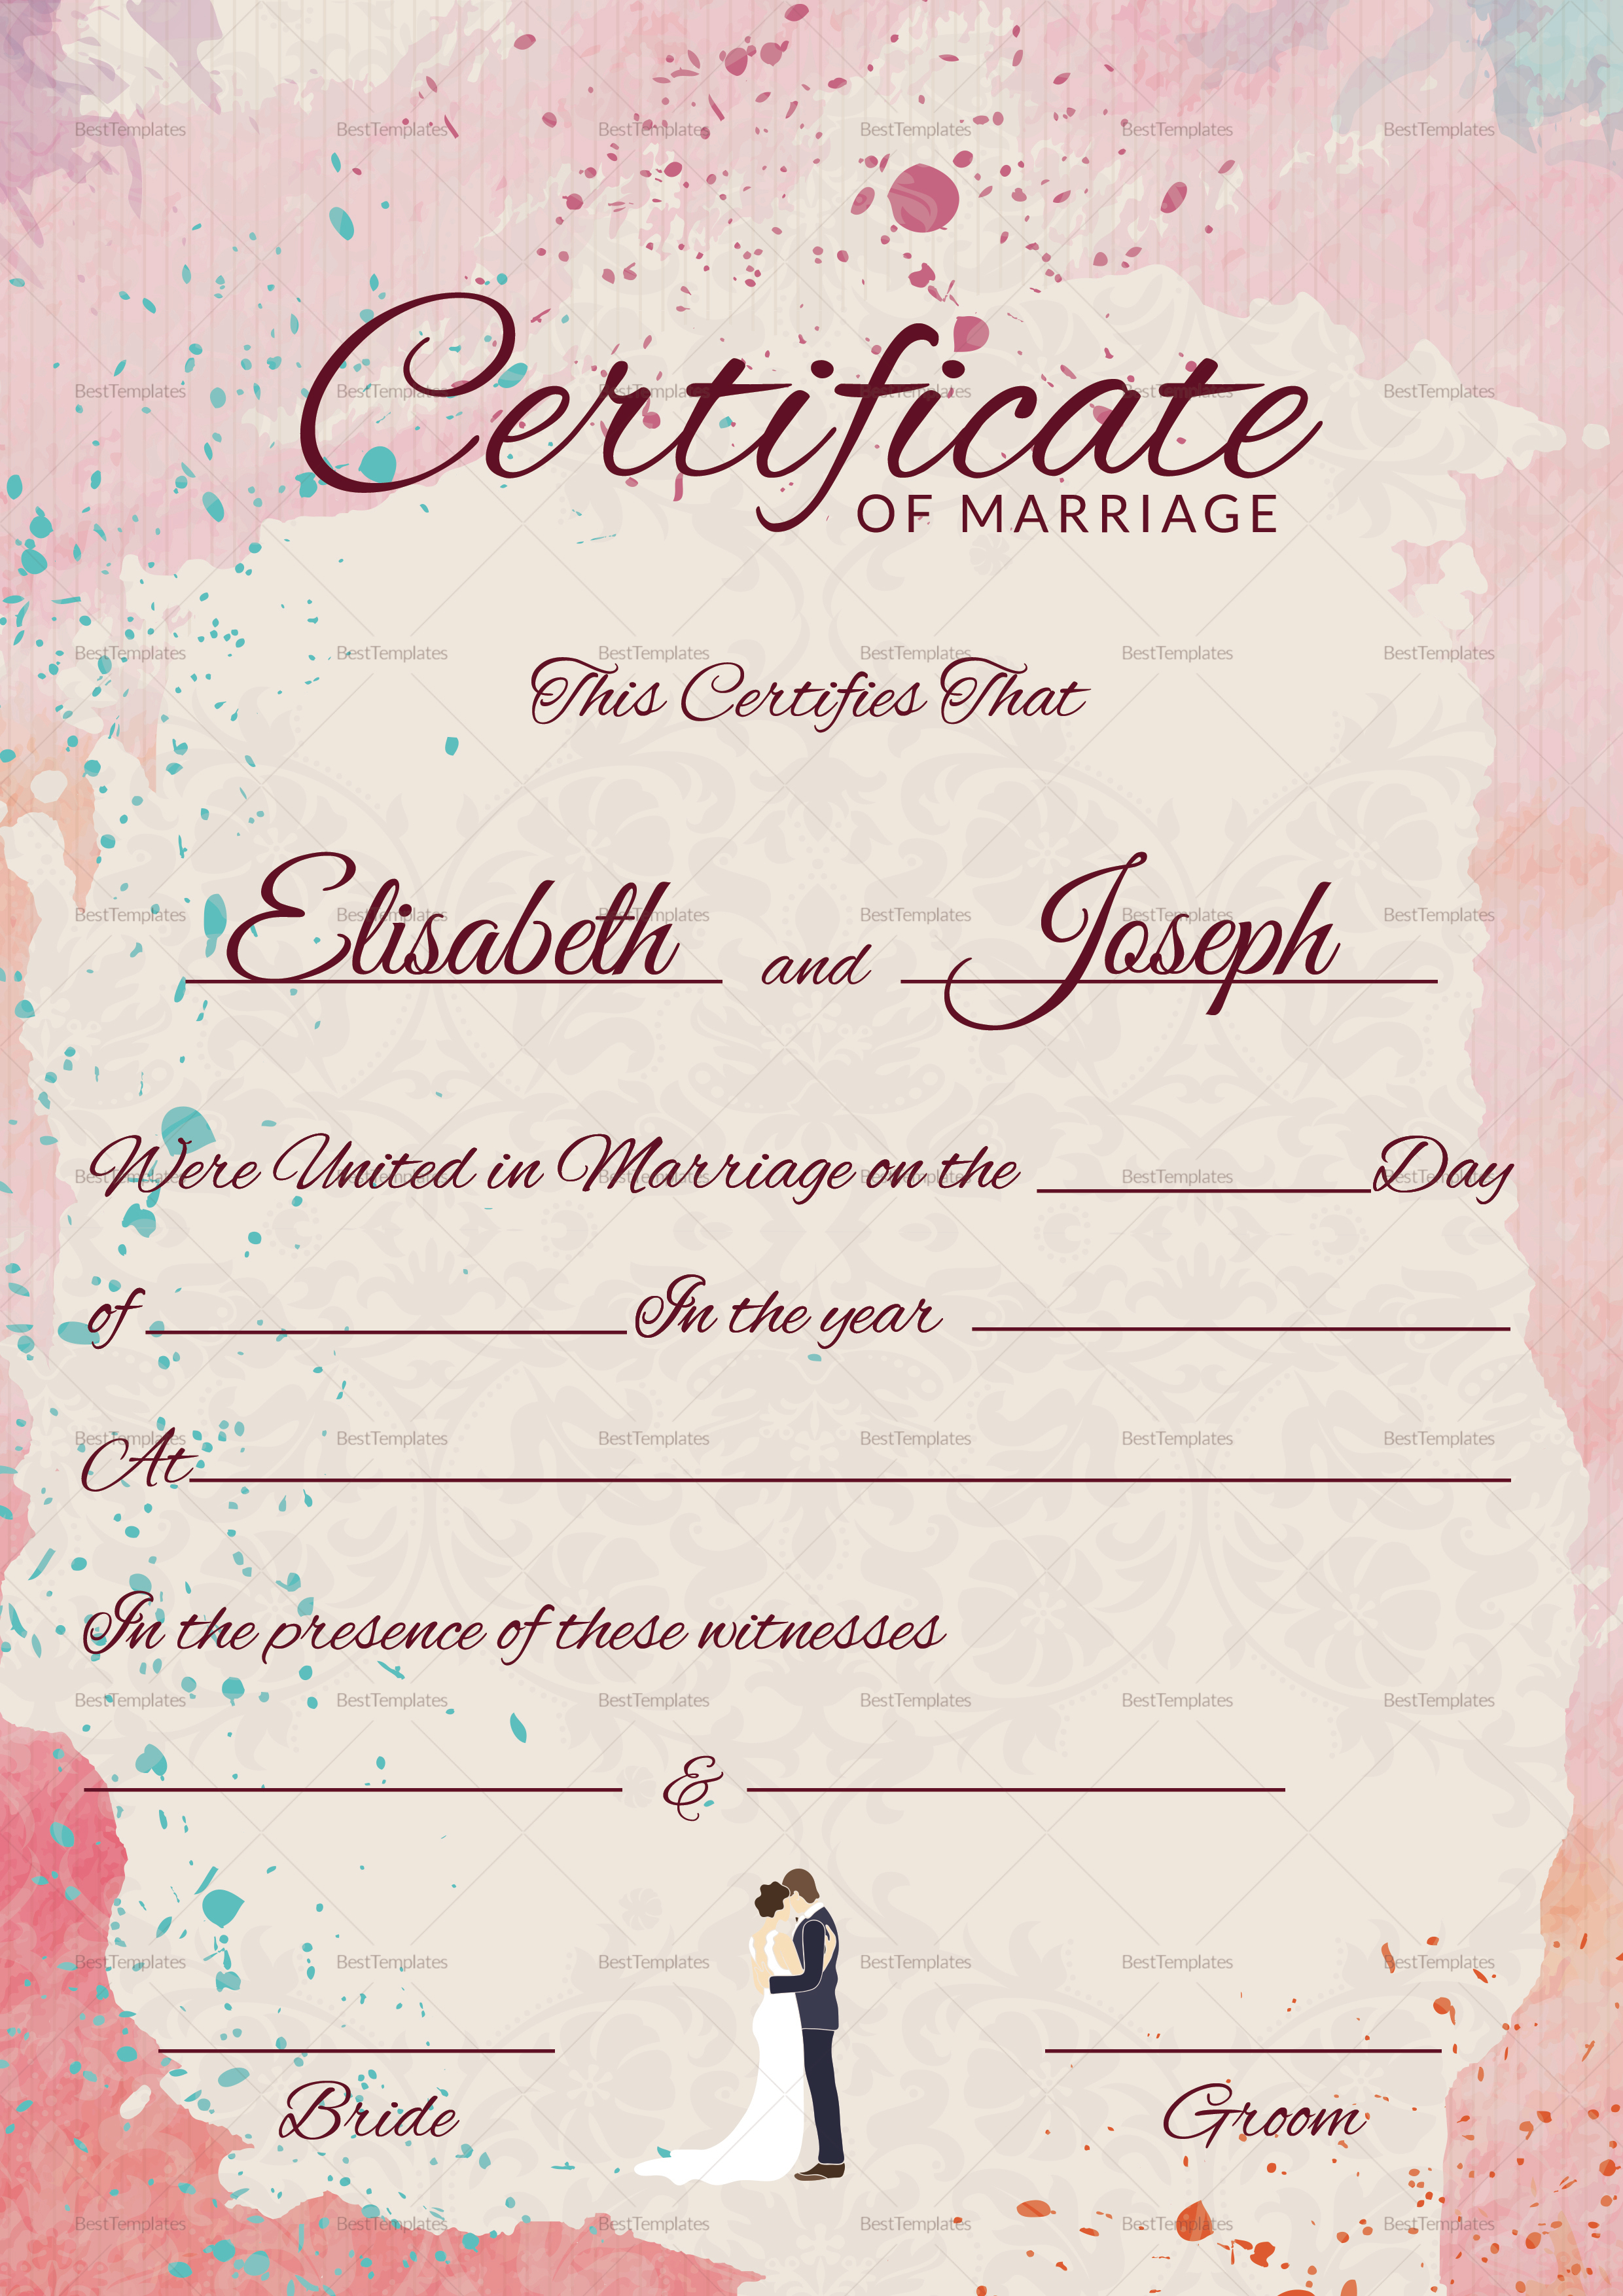 Christian Marriage Certificate Template For Certificate Of Marriage Template